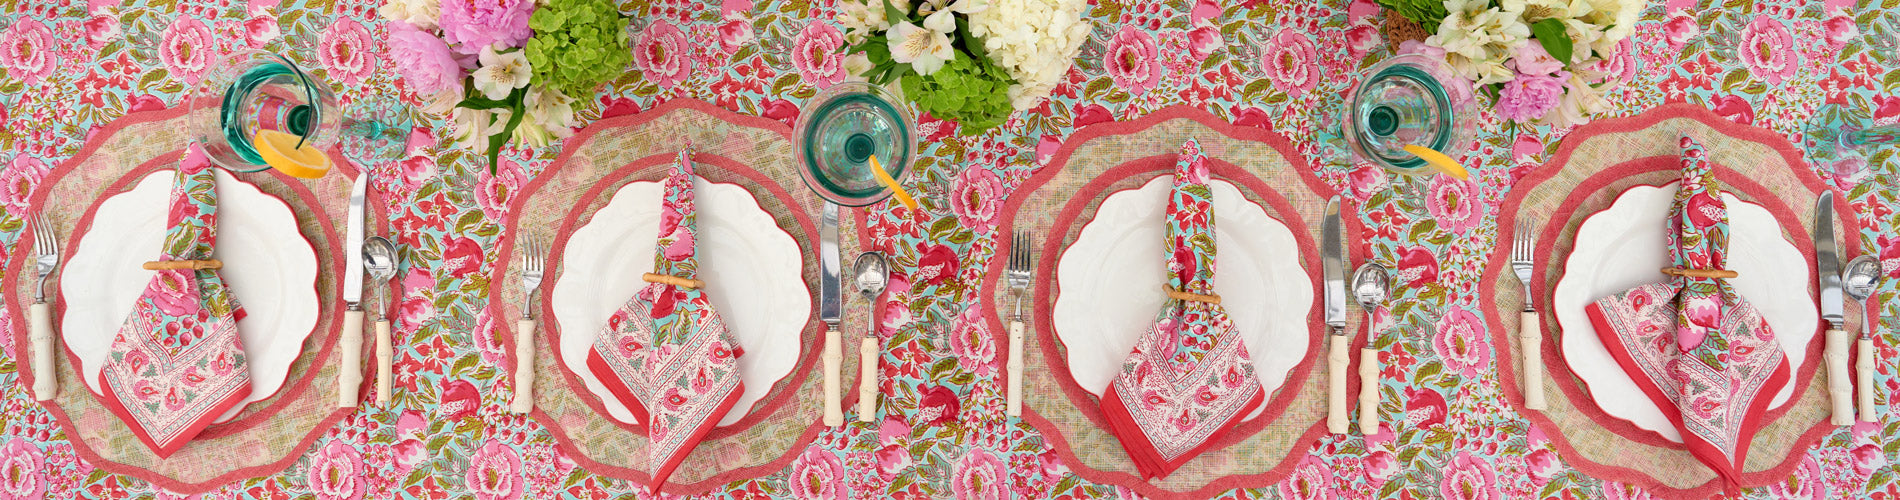 Easter Table Linens & Accessories | Pomegranate Inc.